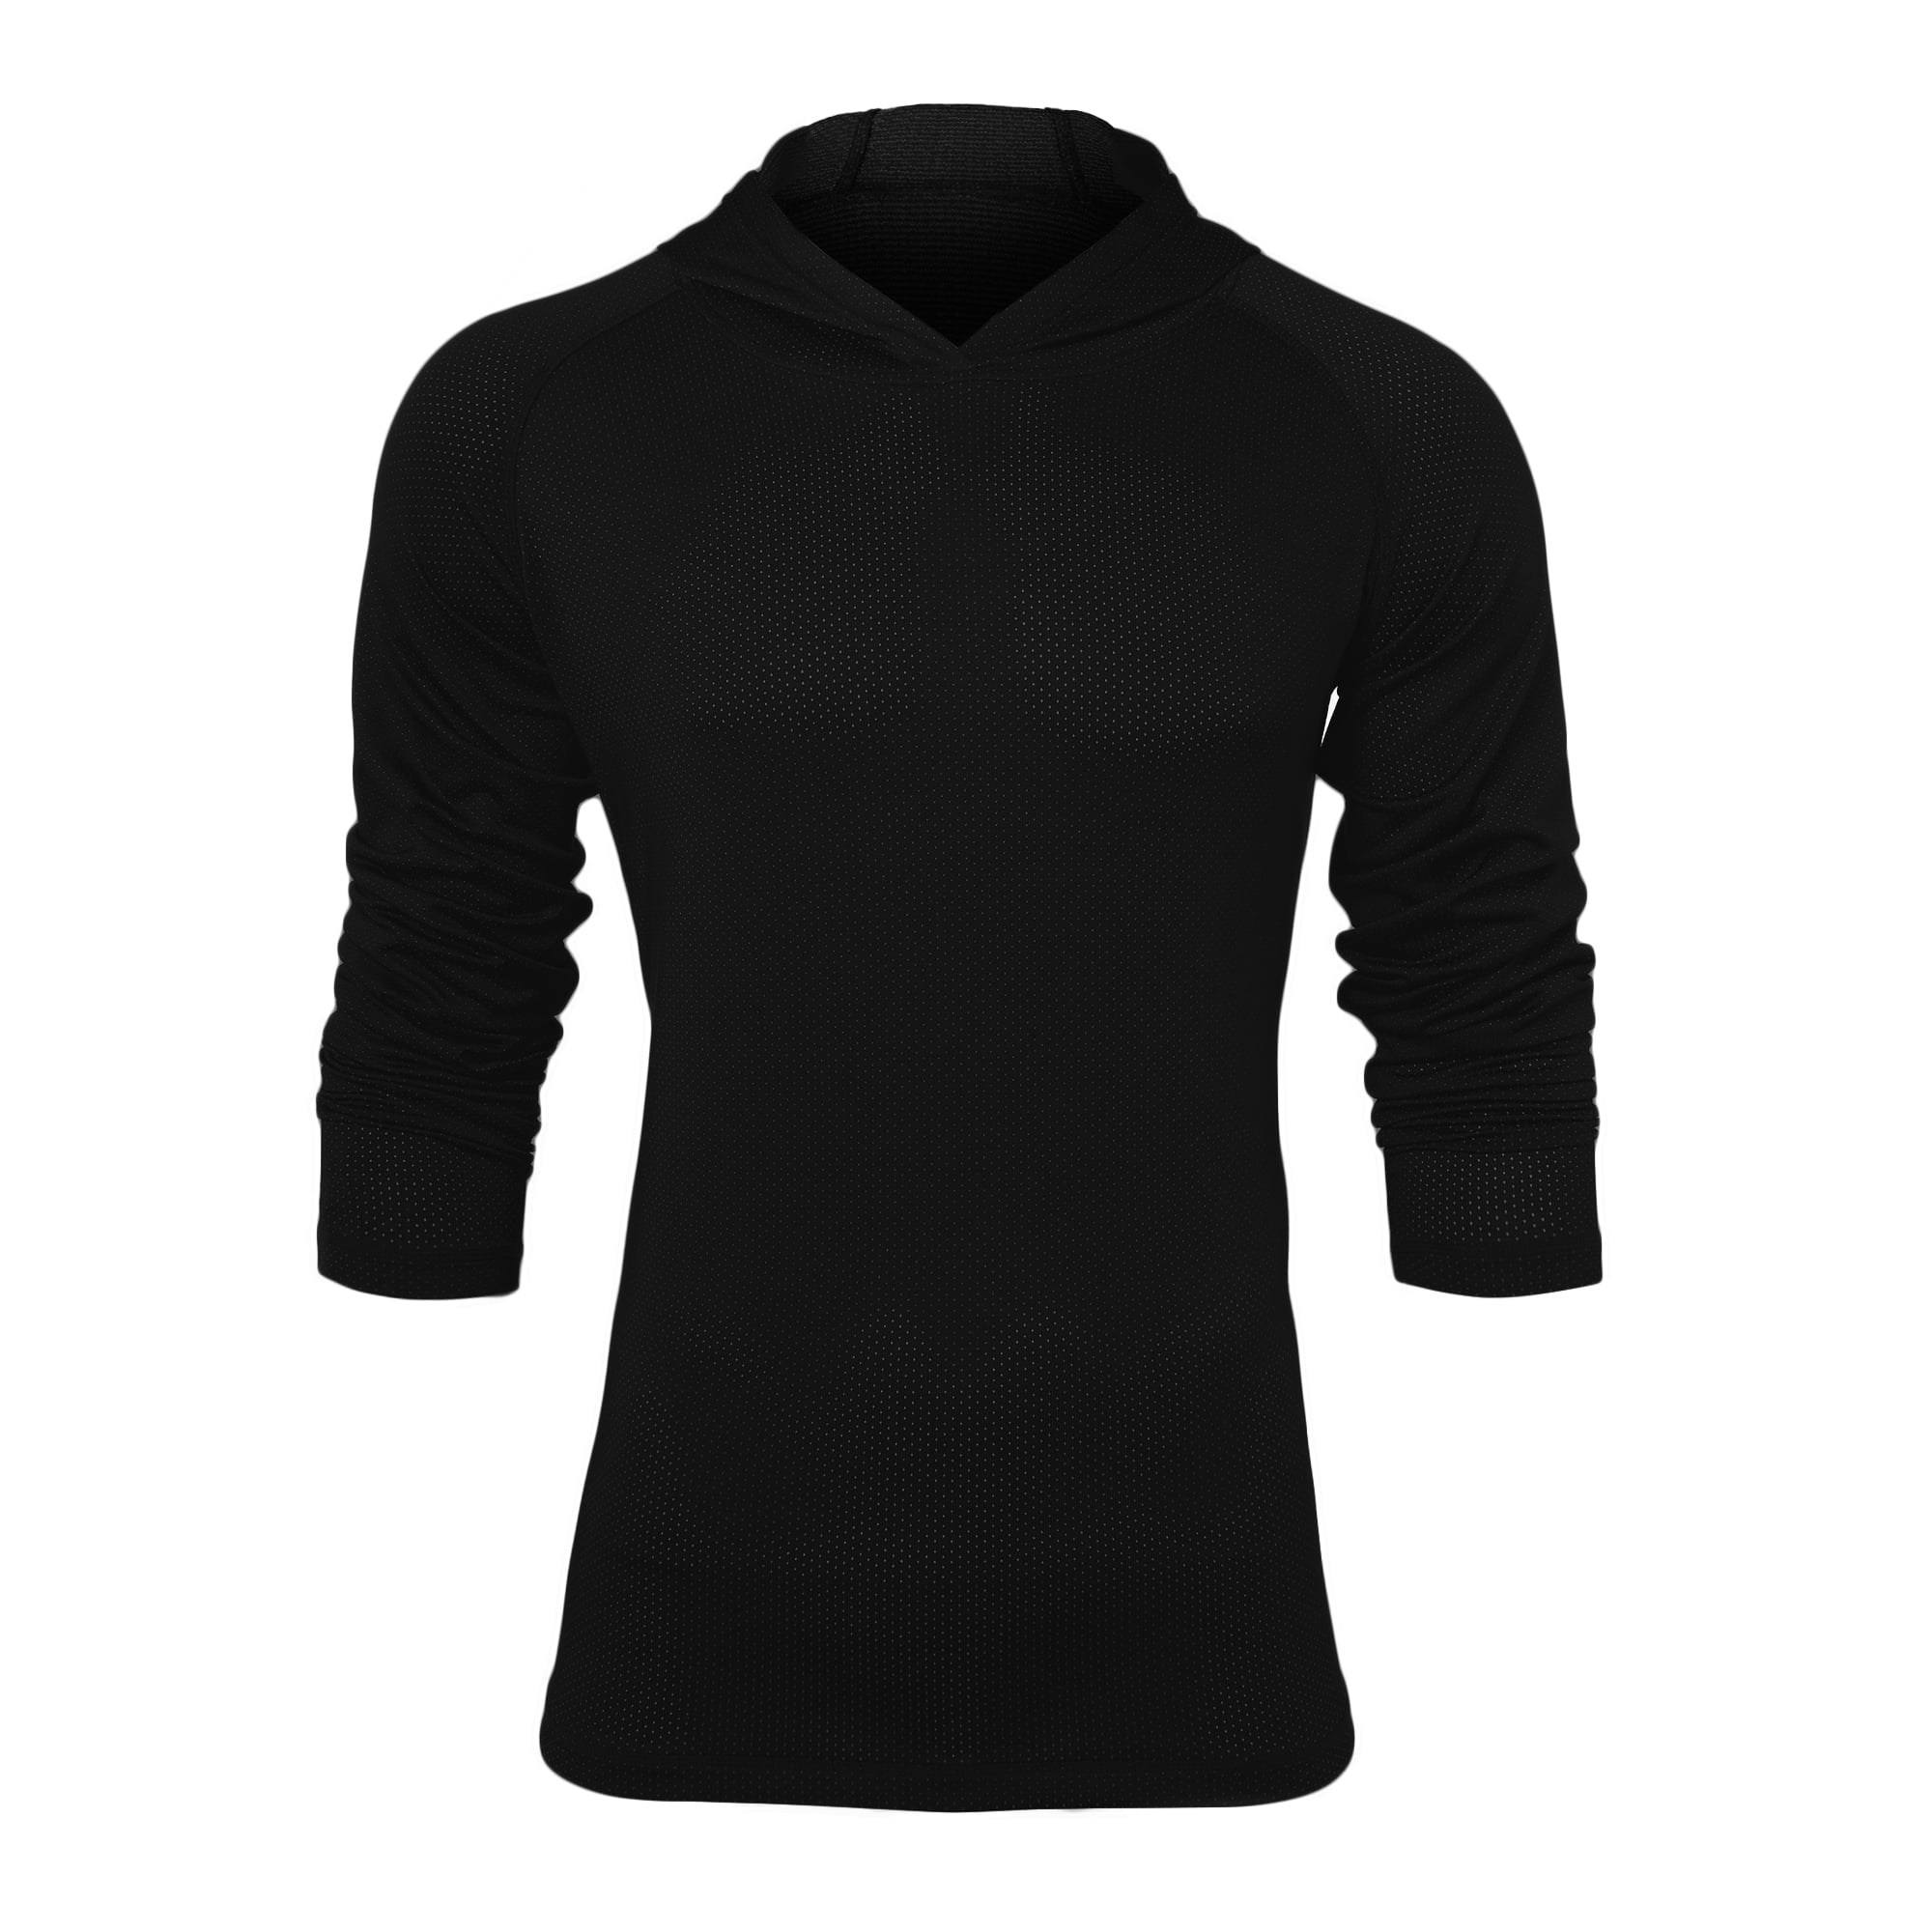 Men's Athletic Hooded Shirts Long Sleeve Workout Sport Hoodie Casual  Running Shirt Quick Dry Pullover Top, Black, S 